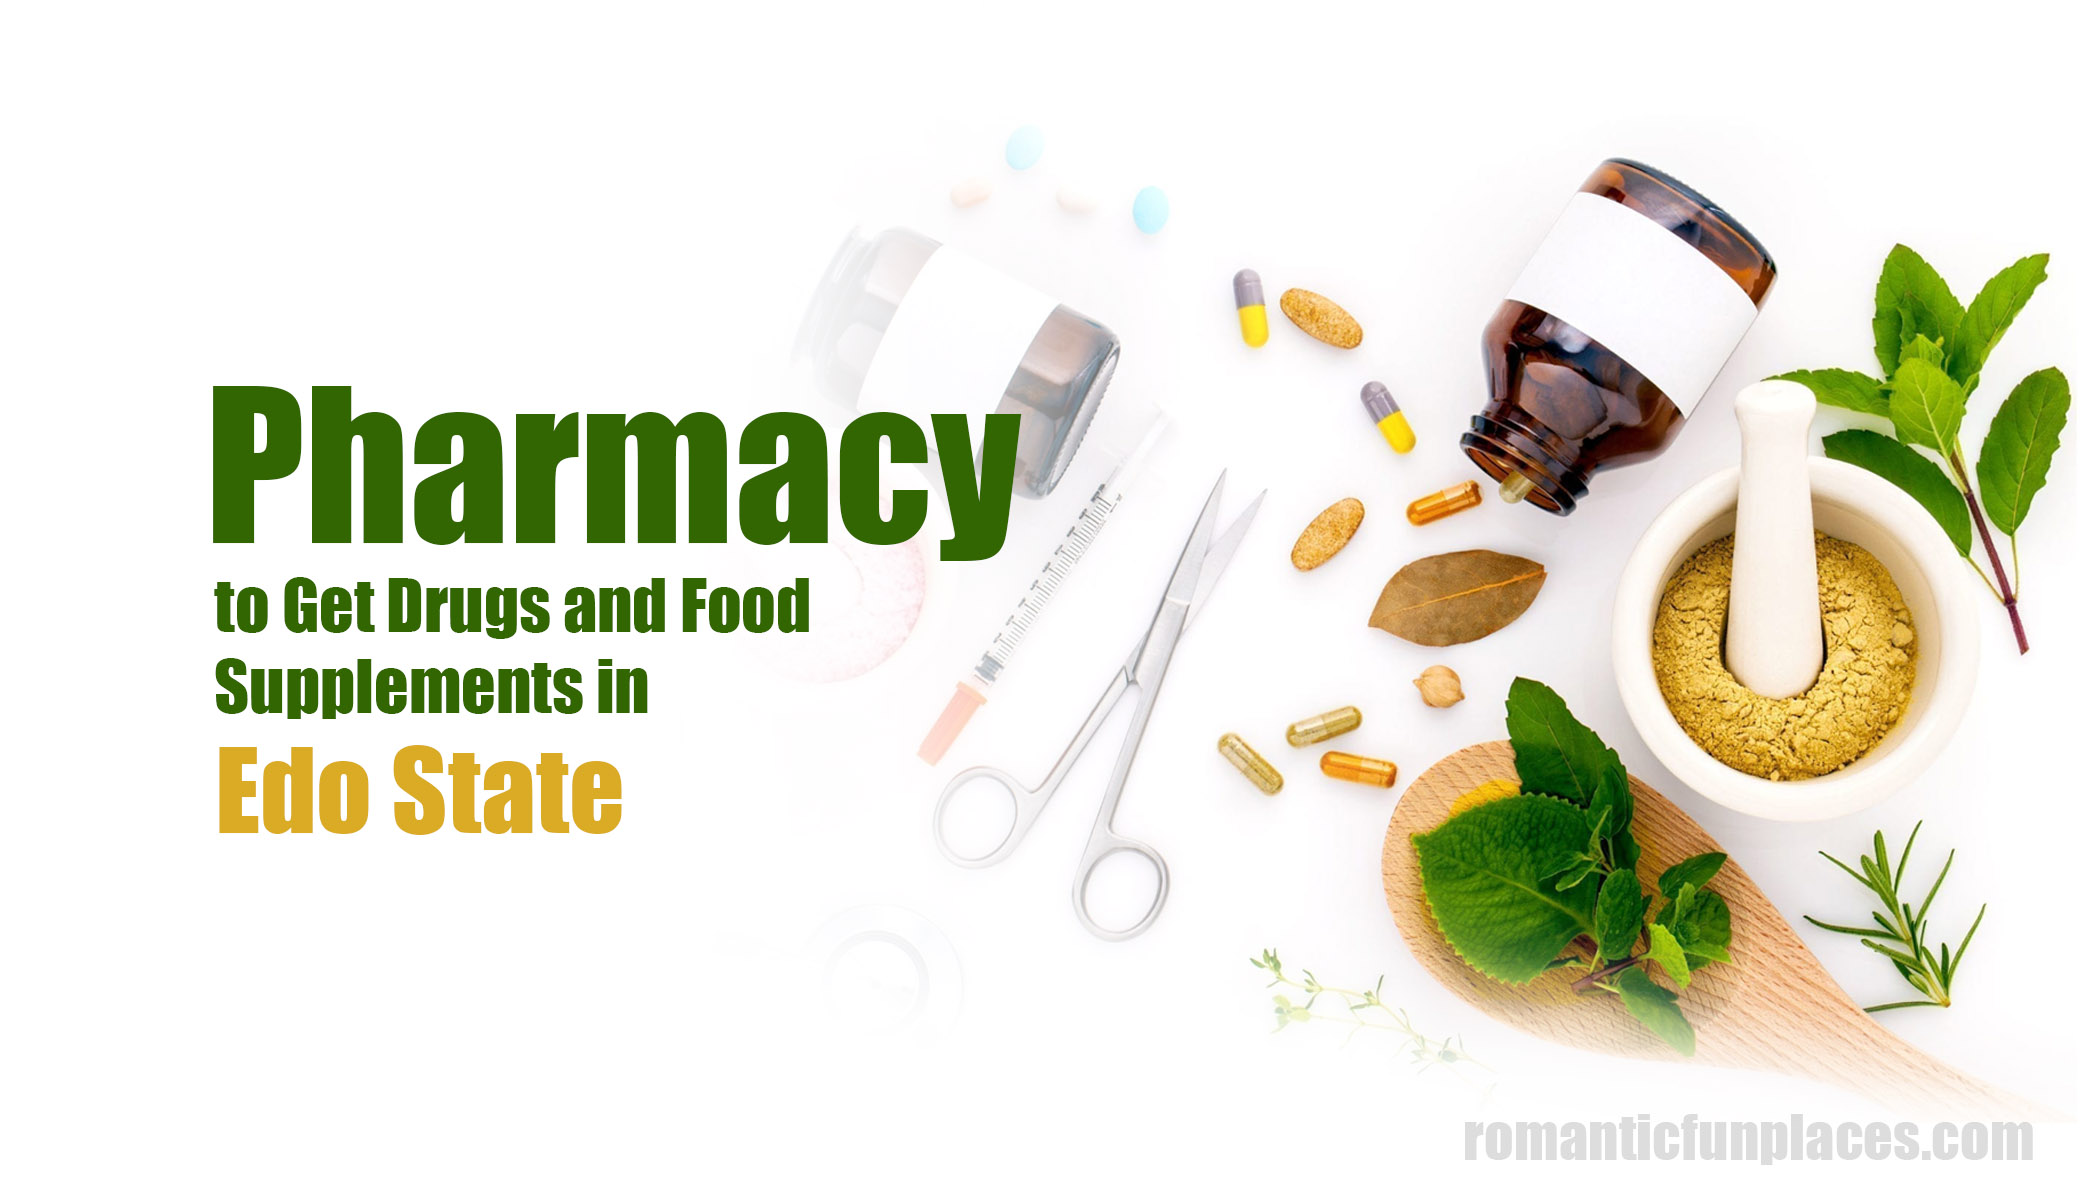 Pharmacy to Get Drugs and Food Supplements in Edo State